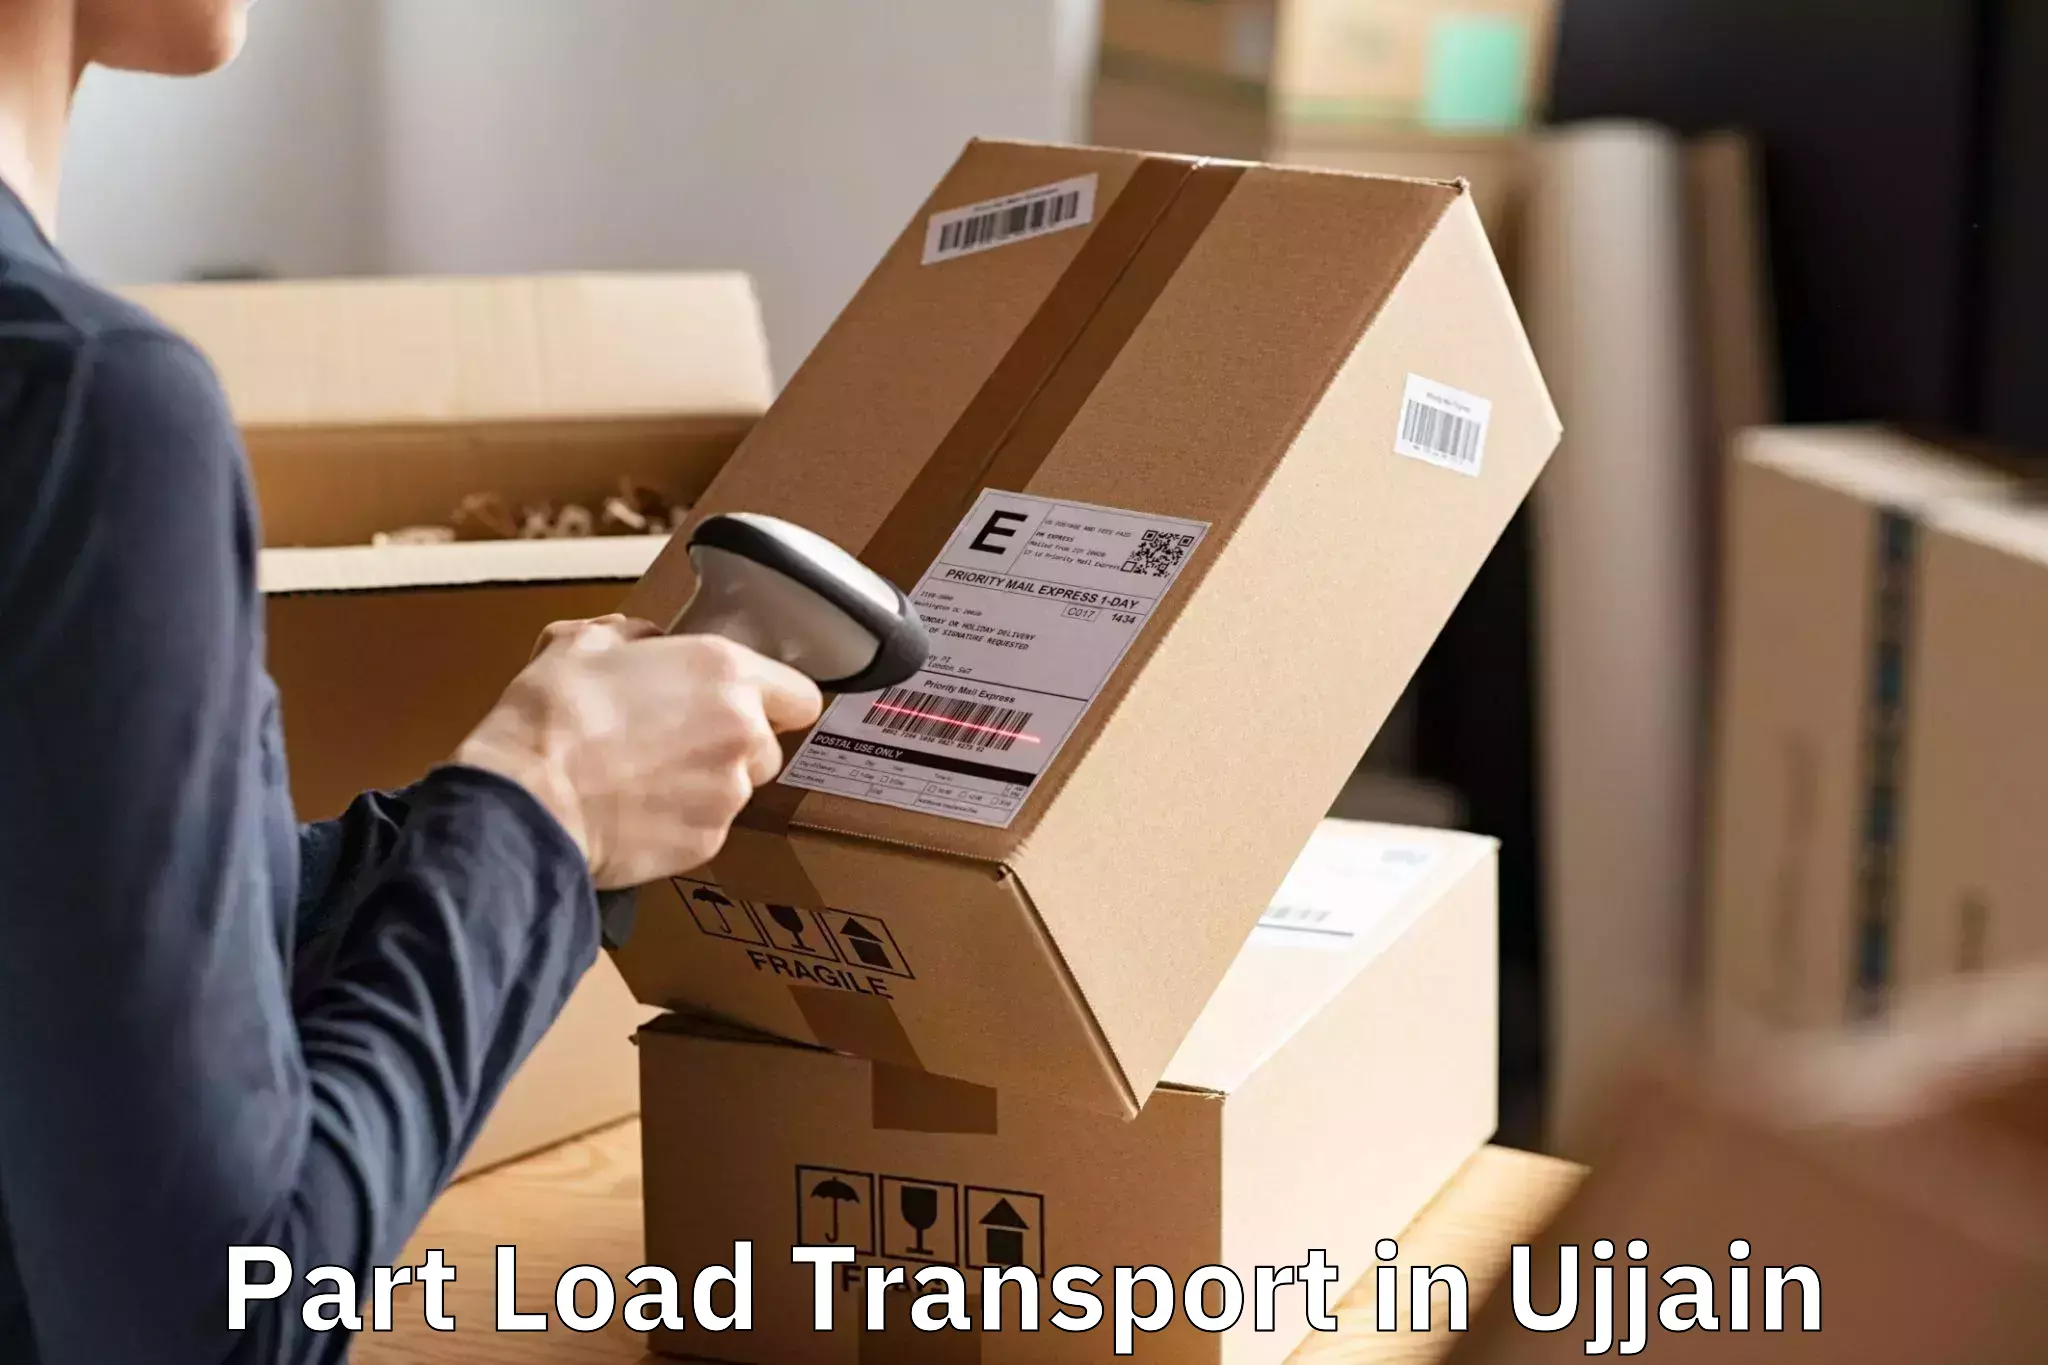 Reliable Part Load Transport Available in Ujjain, Madhya Pradesh (MP)